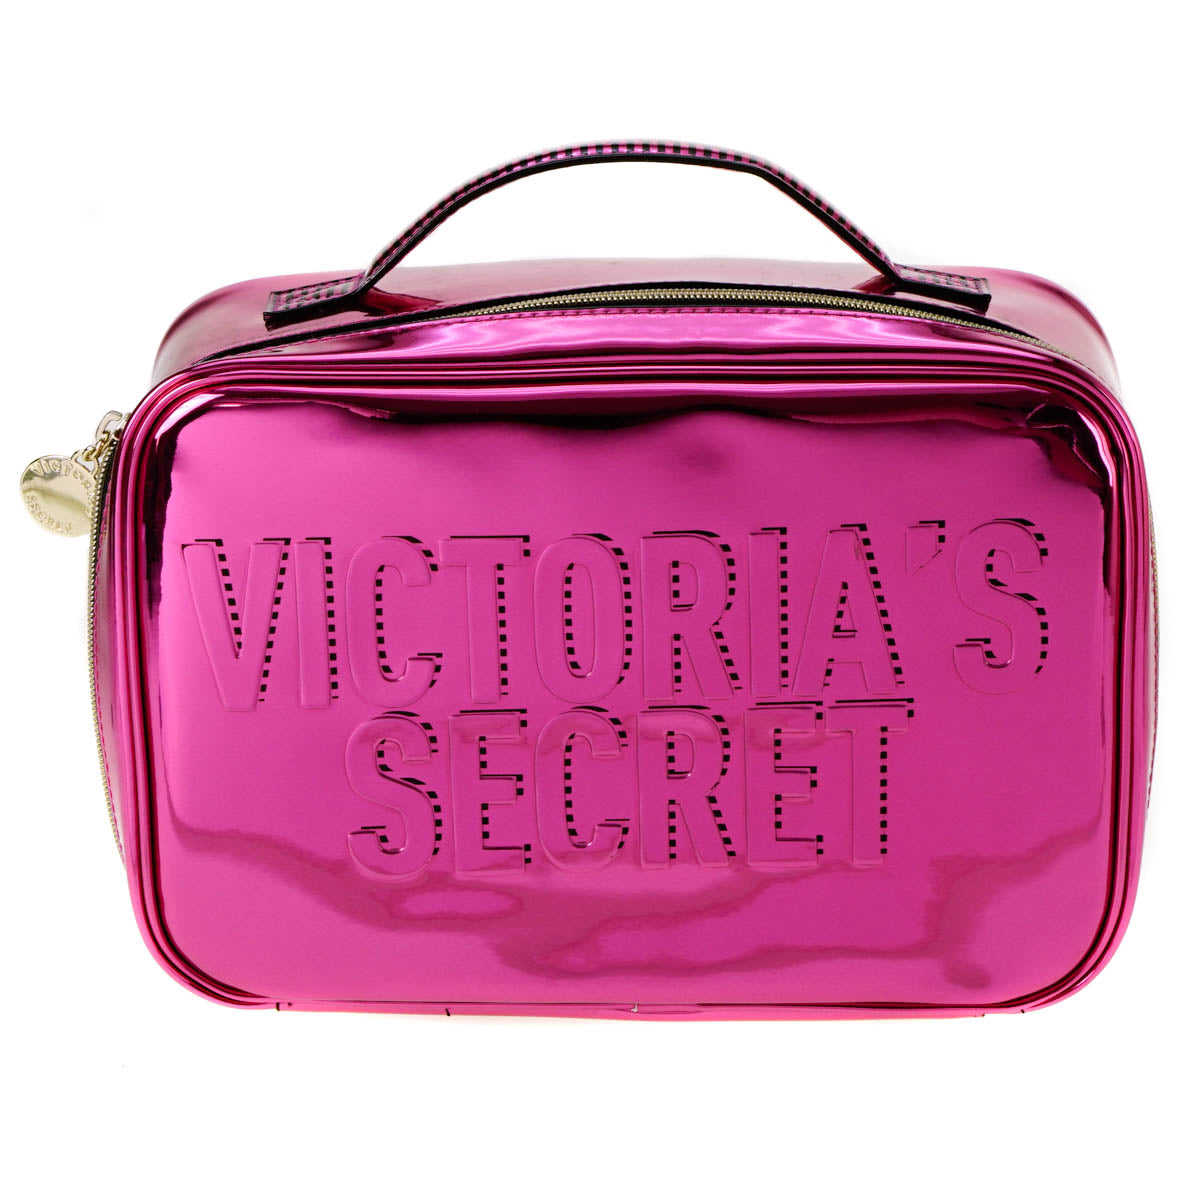 Victoria's Secret Jetsetter Hanging Cosmetic Case, Pink Iconic